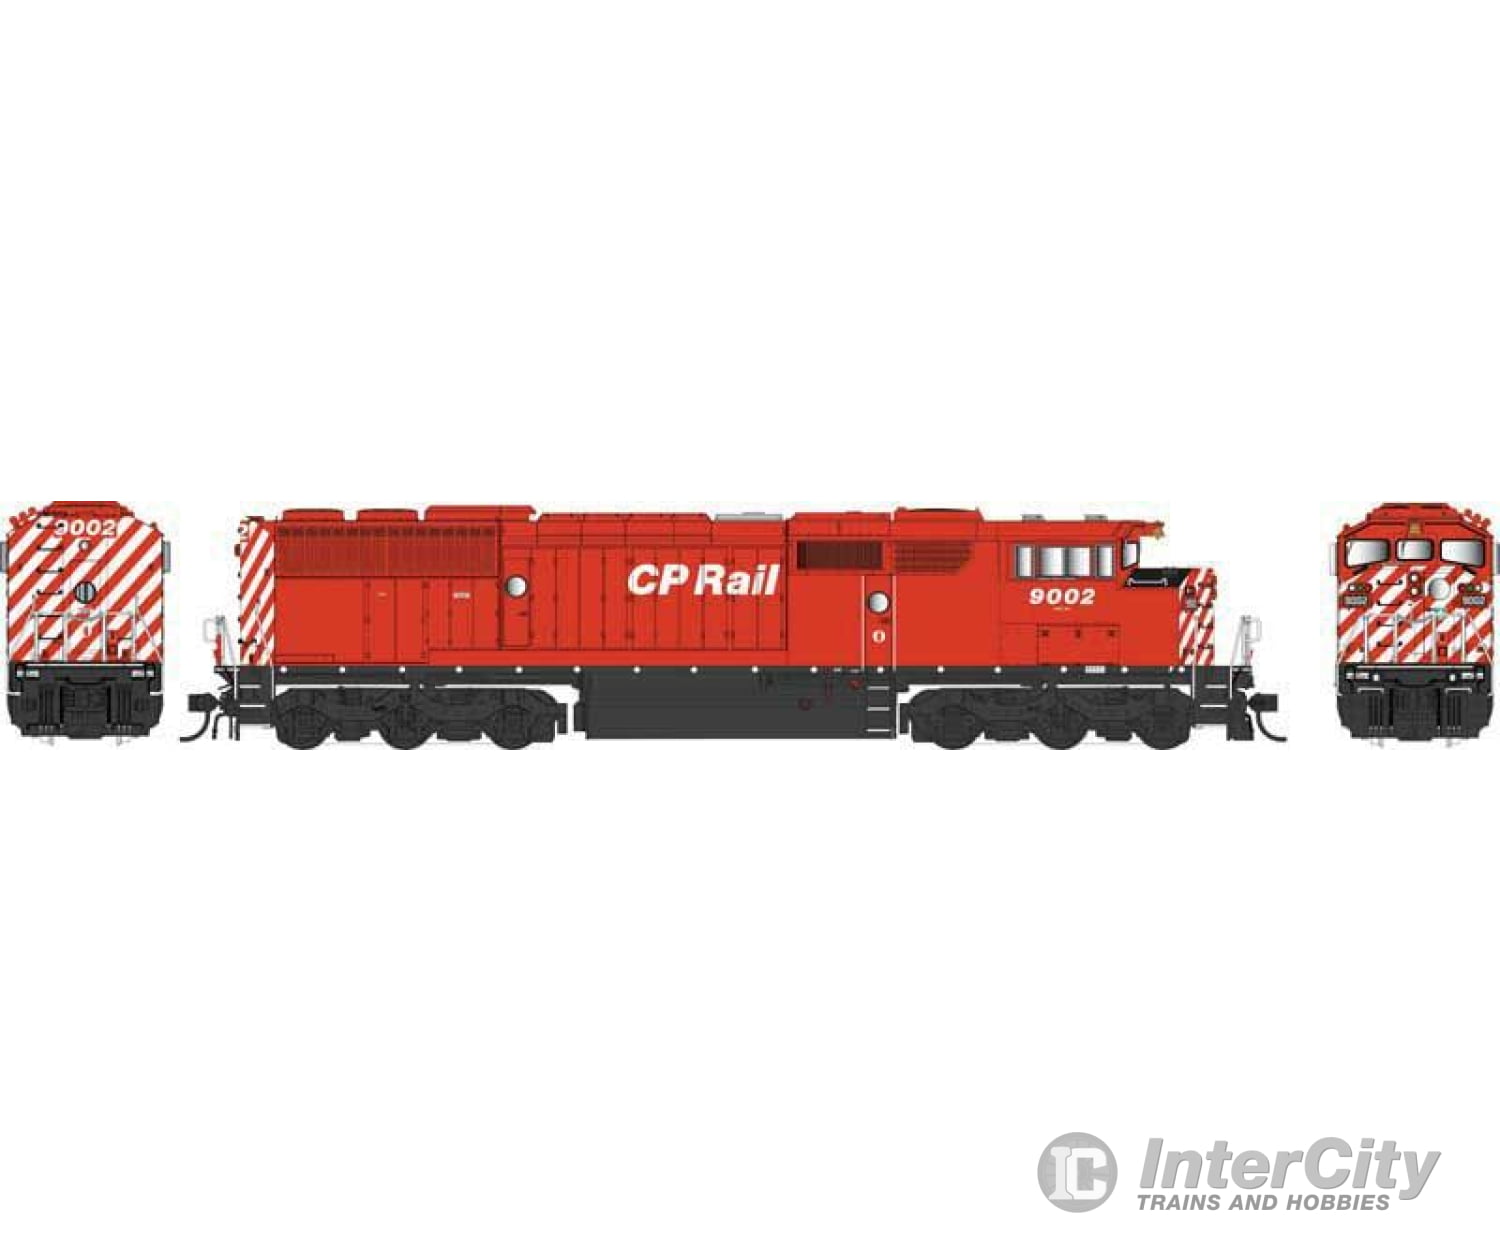 Bowser 24994 Ho Gmd Sd40-2F - Loksound & Dcc Executive Line -- Canadian Pacific #9002 (Action Red